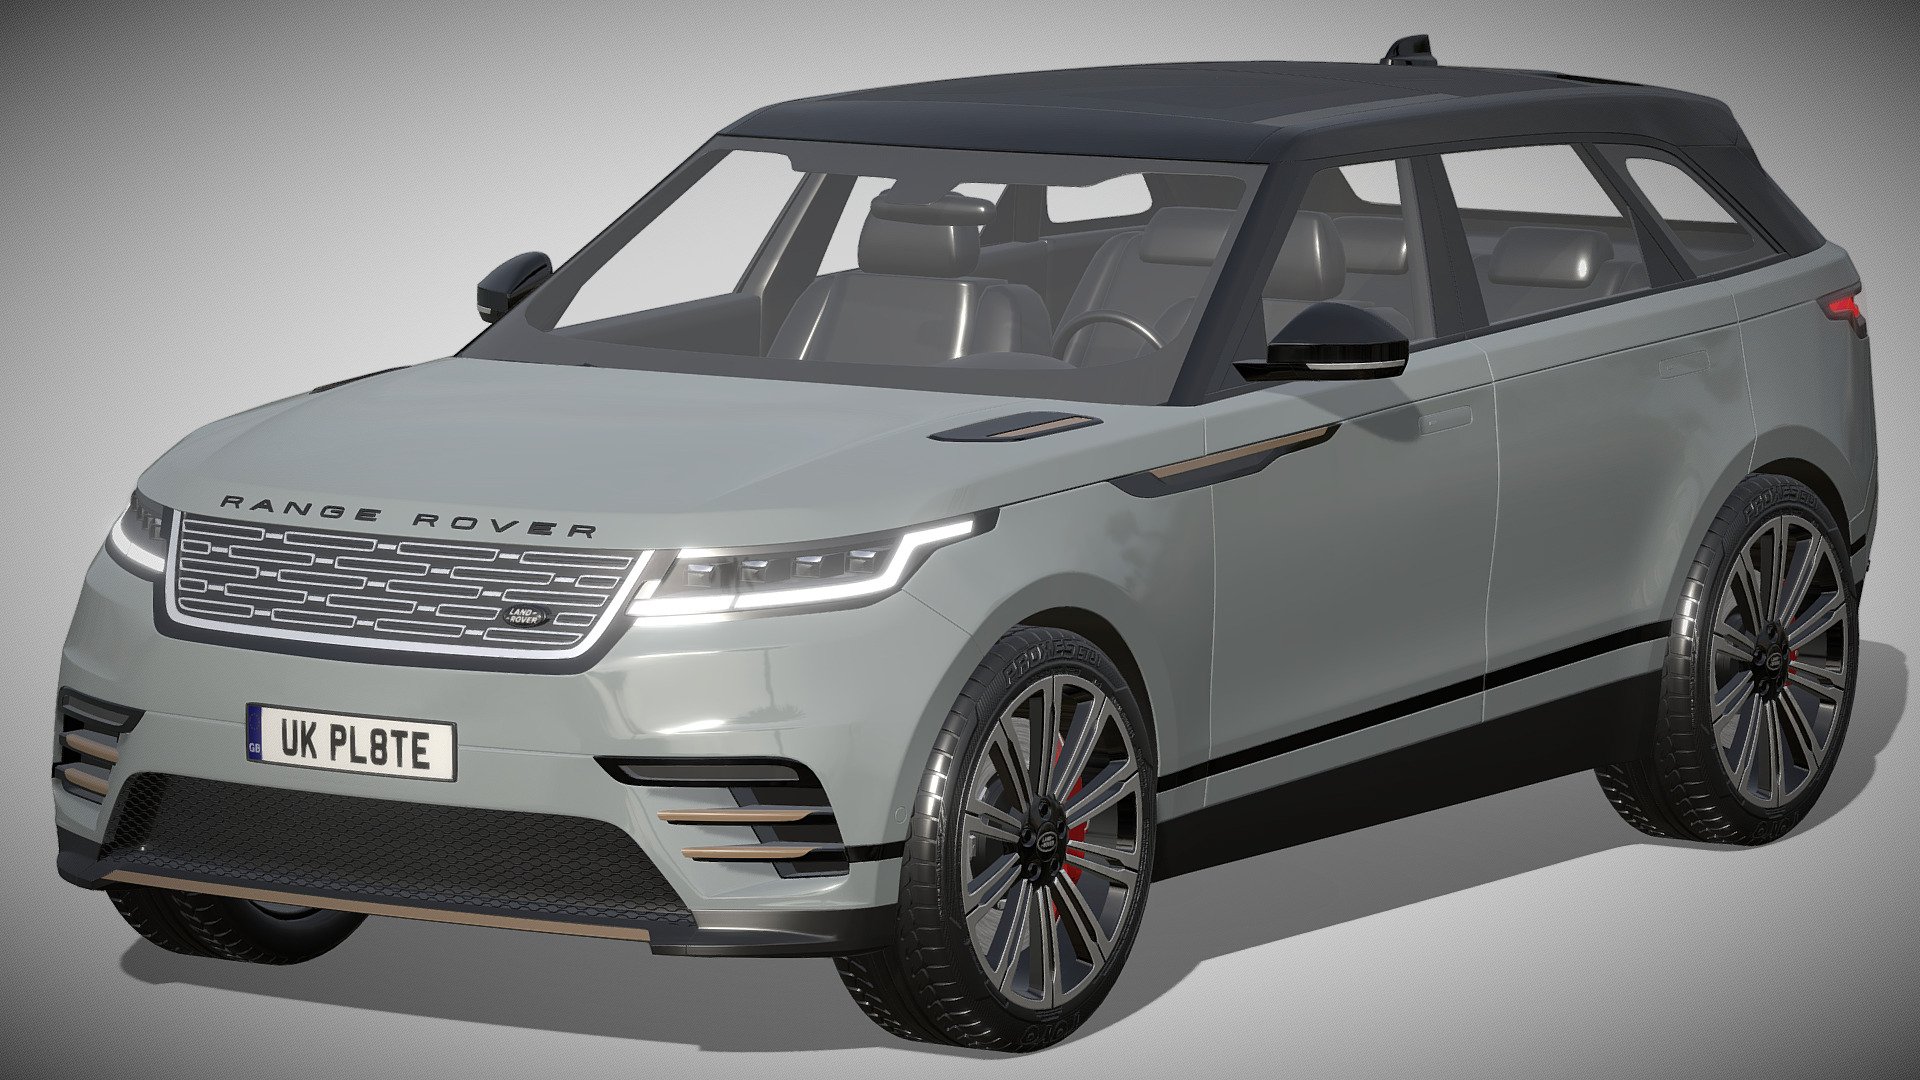 Land Rover Range Rover Velar 2023

https://www.landrover.com/vehicles/range-rover-velar/index.html

Clean geometry Light weight model, yet completely detailed for HI-Res renders. Use for movies, Advertisements or games

Corona render and materials

All textures include in *.rar files

Lighting setup is not included in the file! - Land Rover Range Rover Velar 2023 - Buy Royalty Free 3D model by zifir3d 3d model